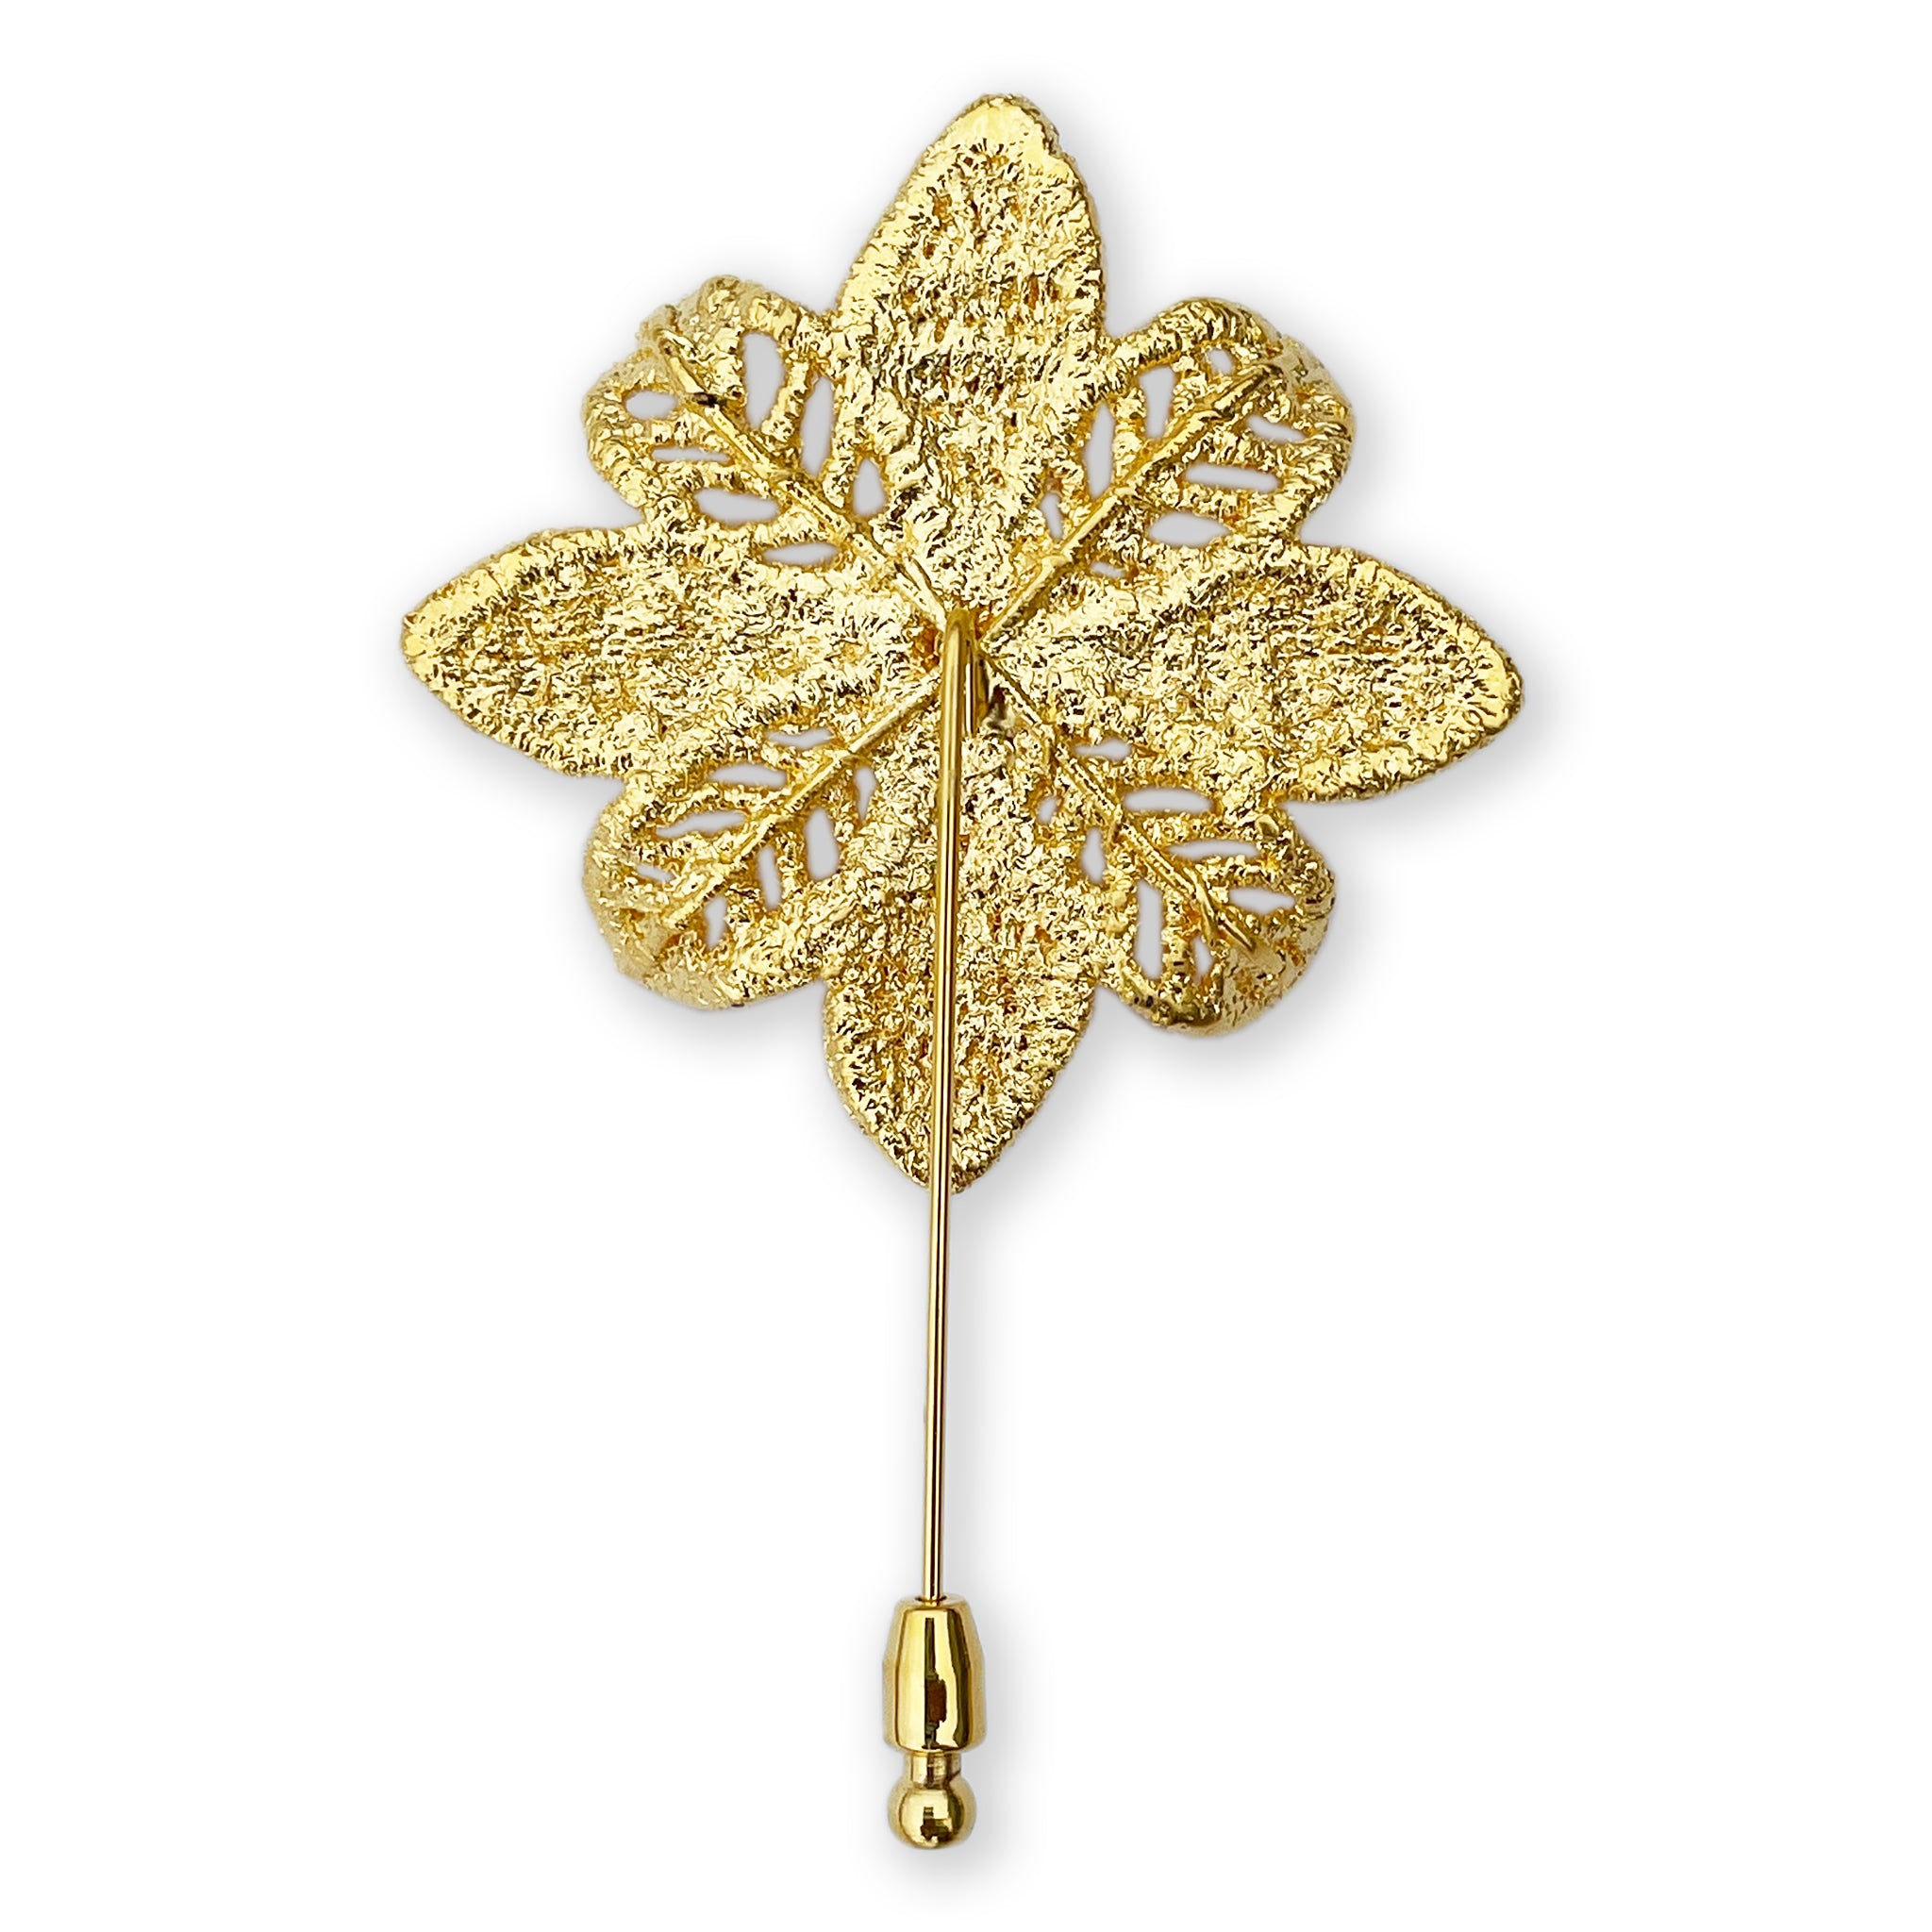 Monika Knutsson Lapel Pin, 24K Gold Lace Flower with Topaz for Wedding